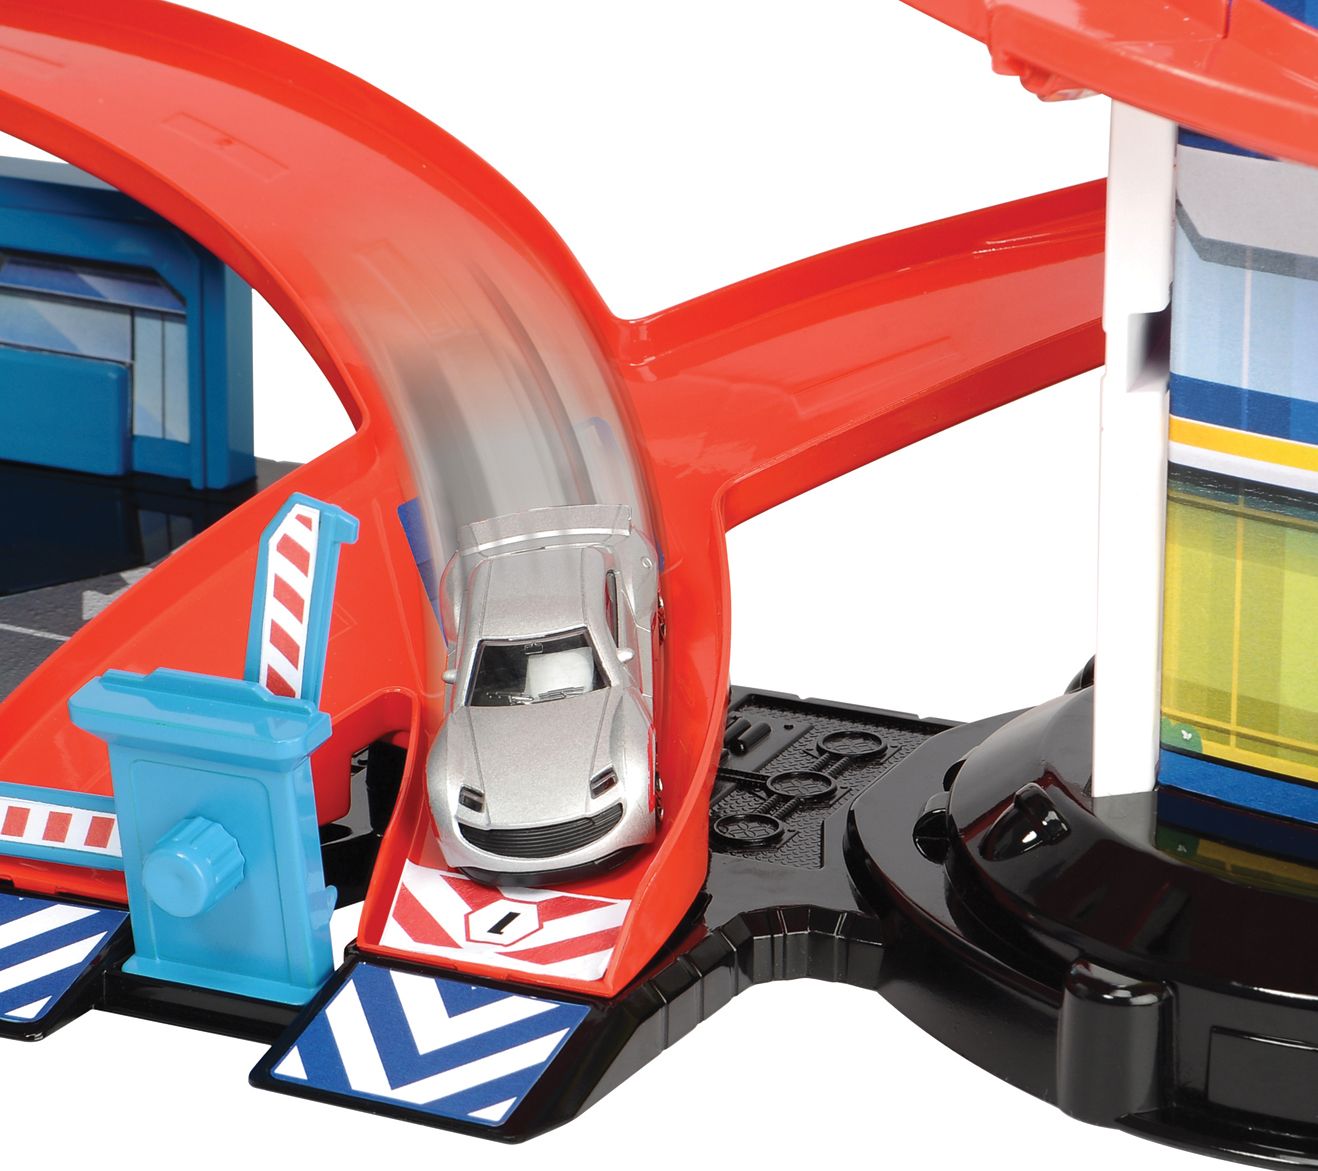 Hot Wheels City Ultimate Garage Track Set with 2 Toy Cars – Square Imports